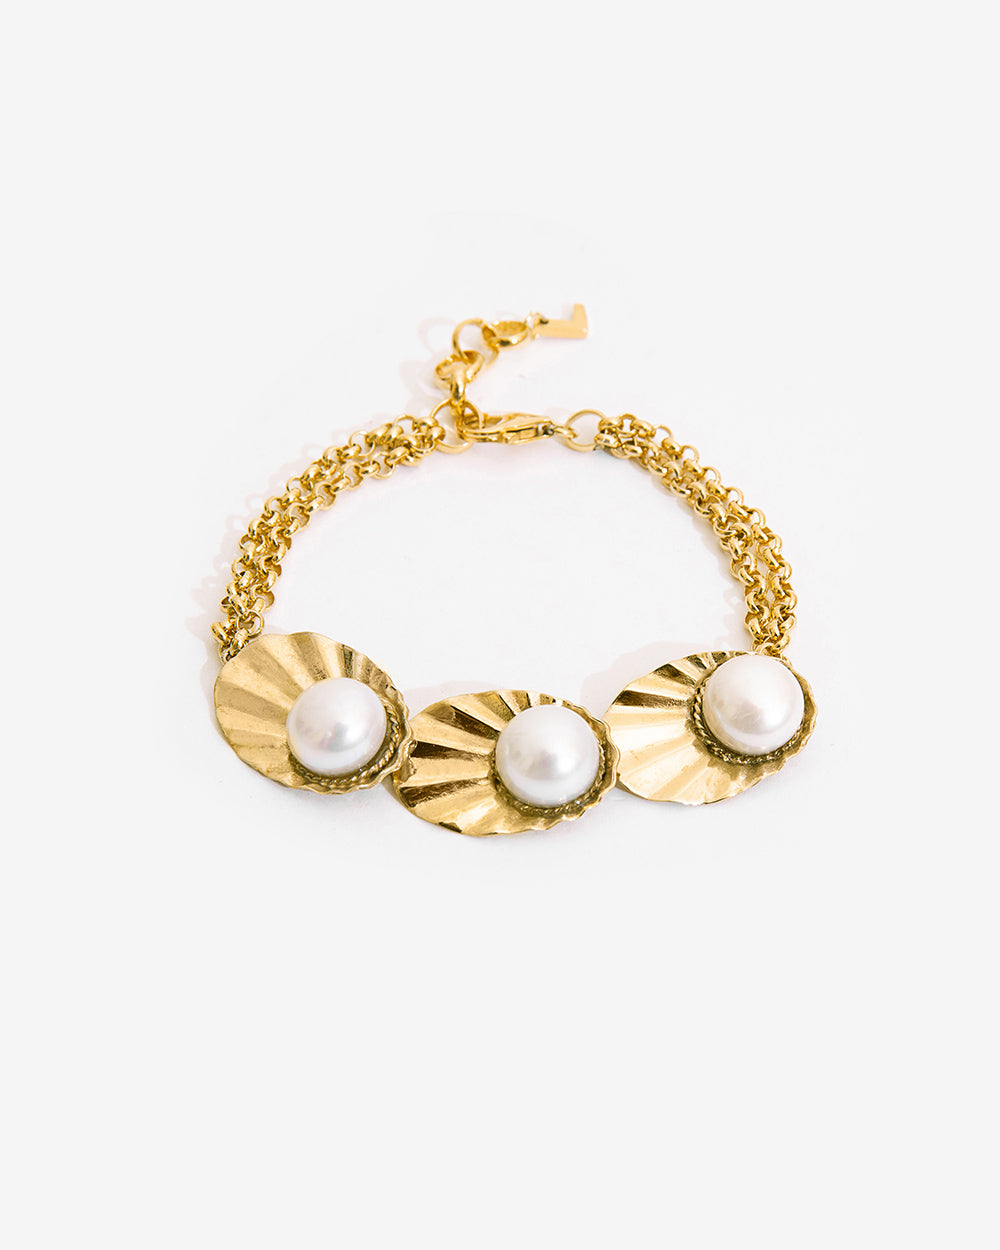 CROWN SHELL BRACELET WITH NATURAL PEARLS